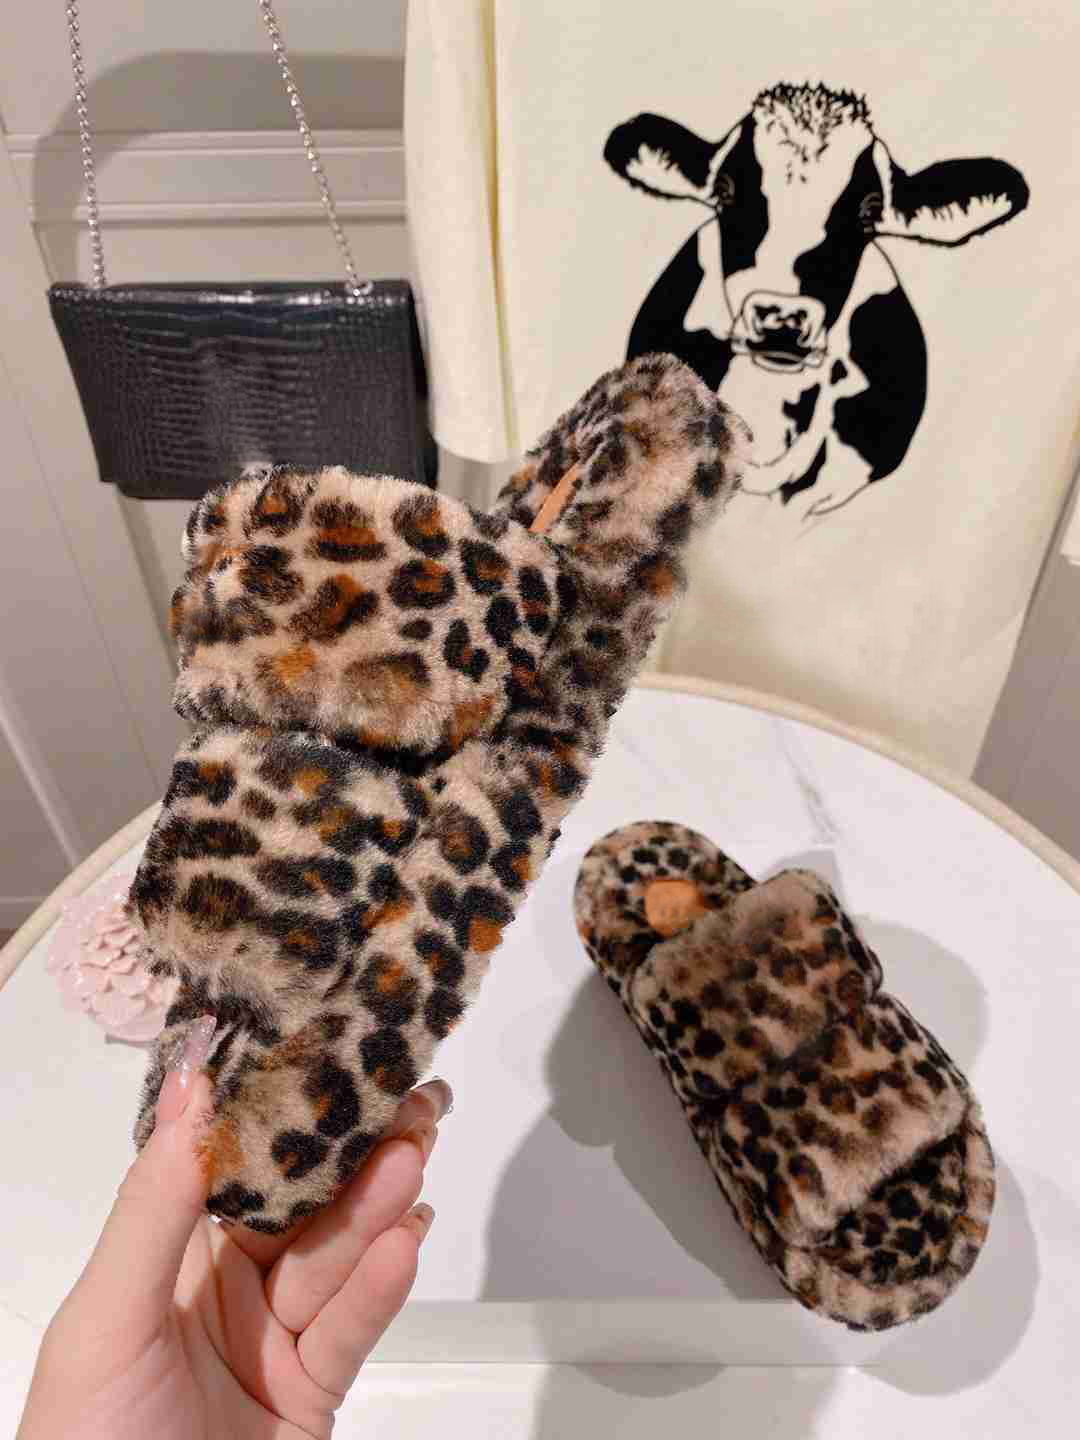 Designer Women's Fur Slippers Cute Furry Sandals Black And White Multicolor Wear-Resistant Non-Slip Warm Slippers Optional 35-40